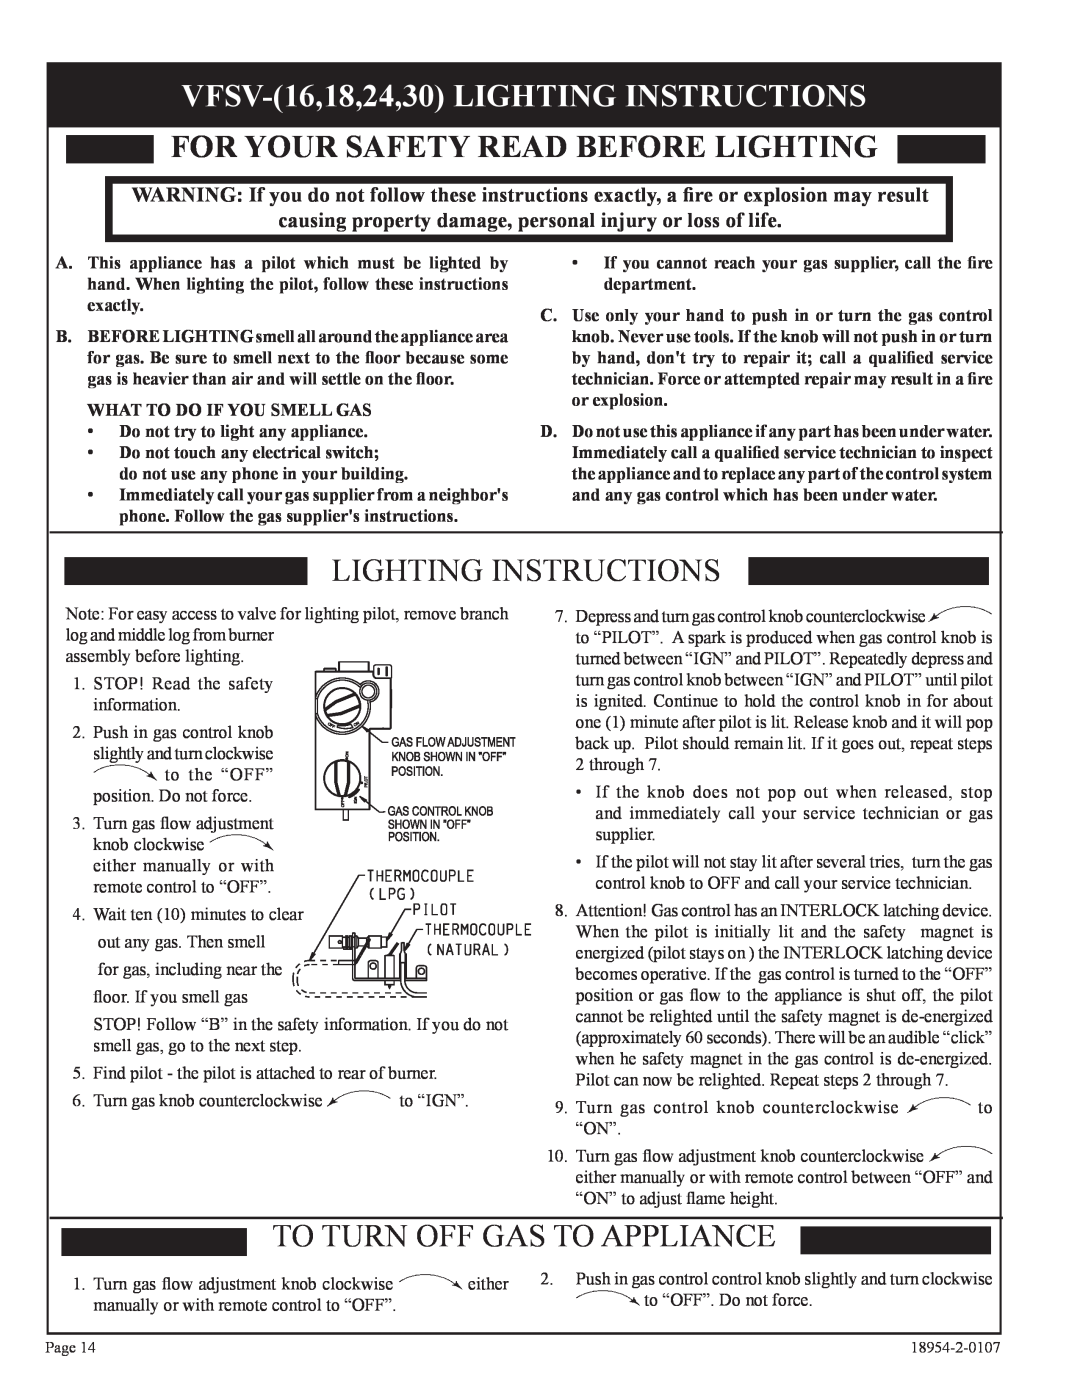 Empire Comfort Systems VFSM-30-3 installation instructions Lighting Instructions, To Turn Off Gas To Appliance 